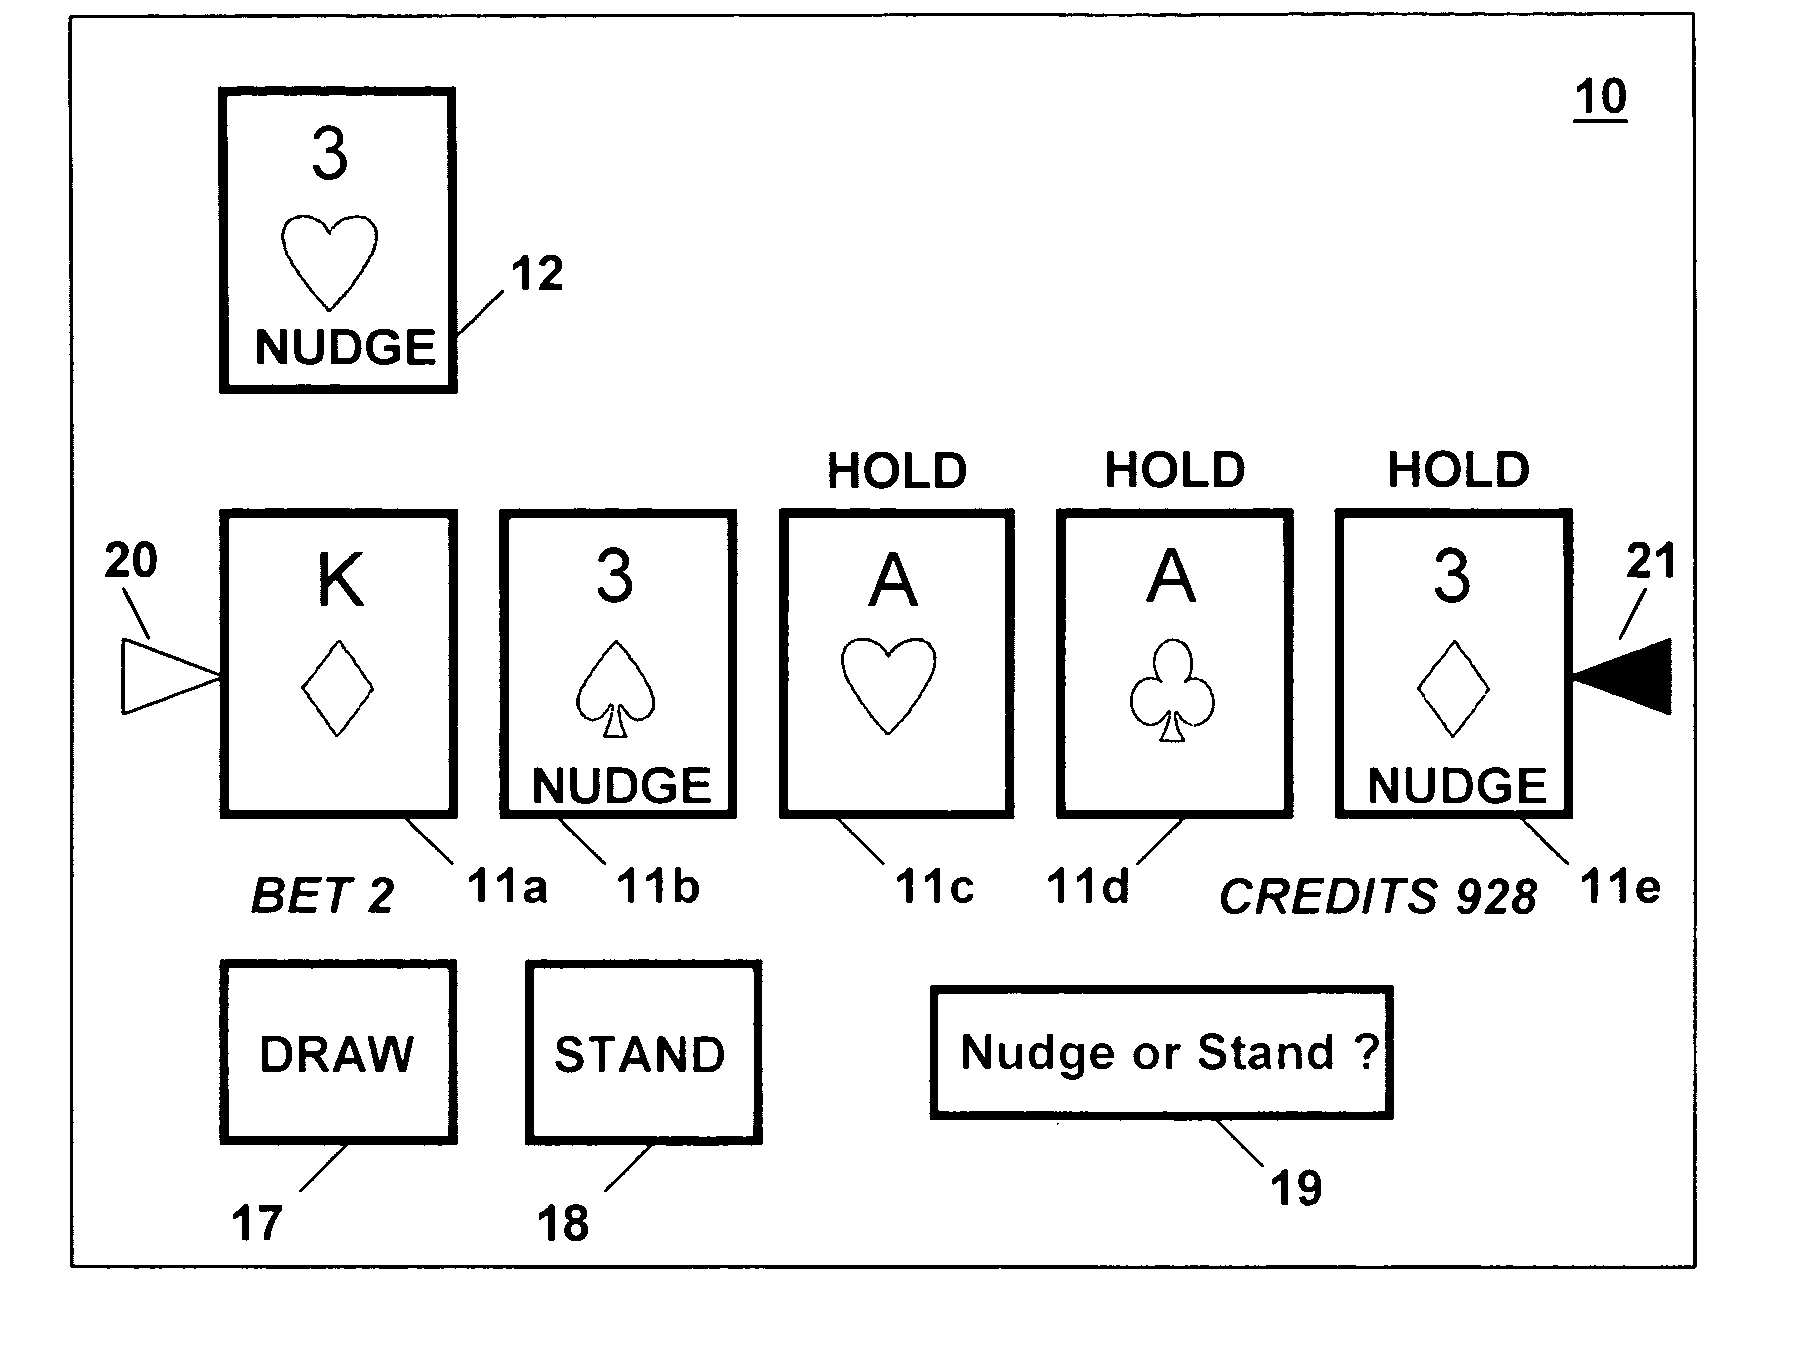 Method for playing poker with additional card draws